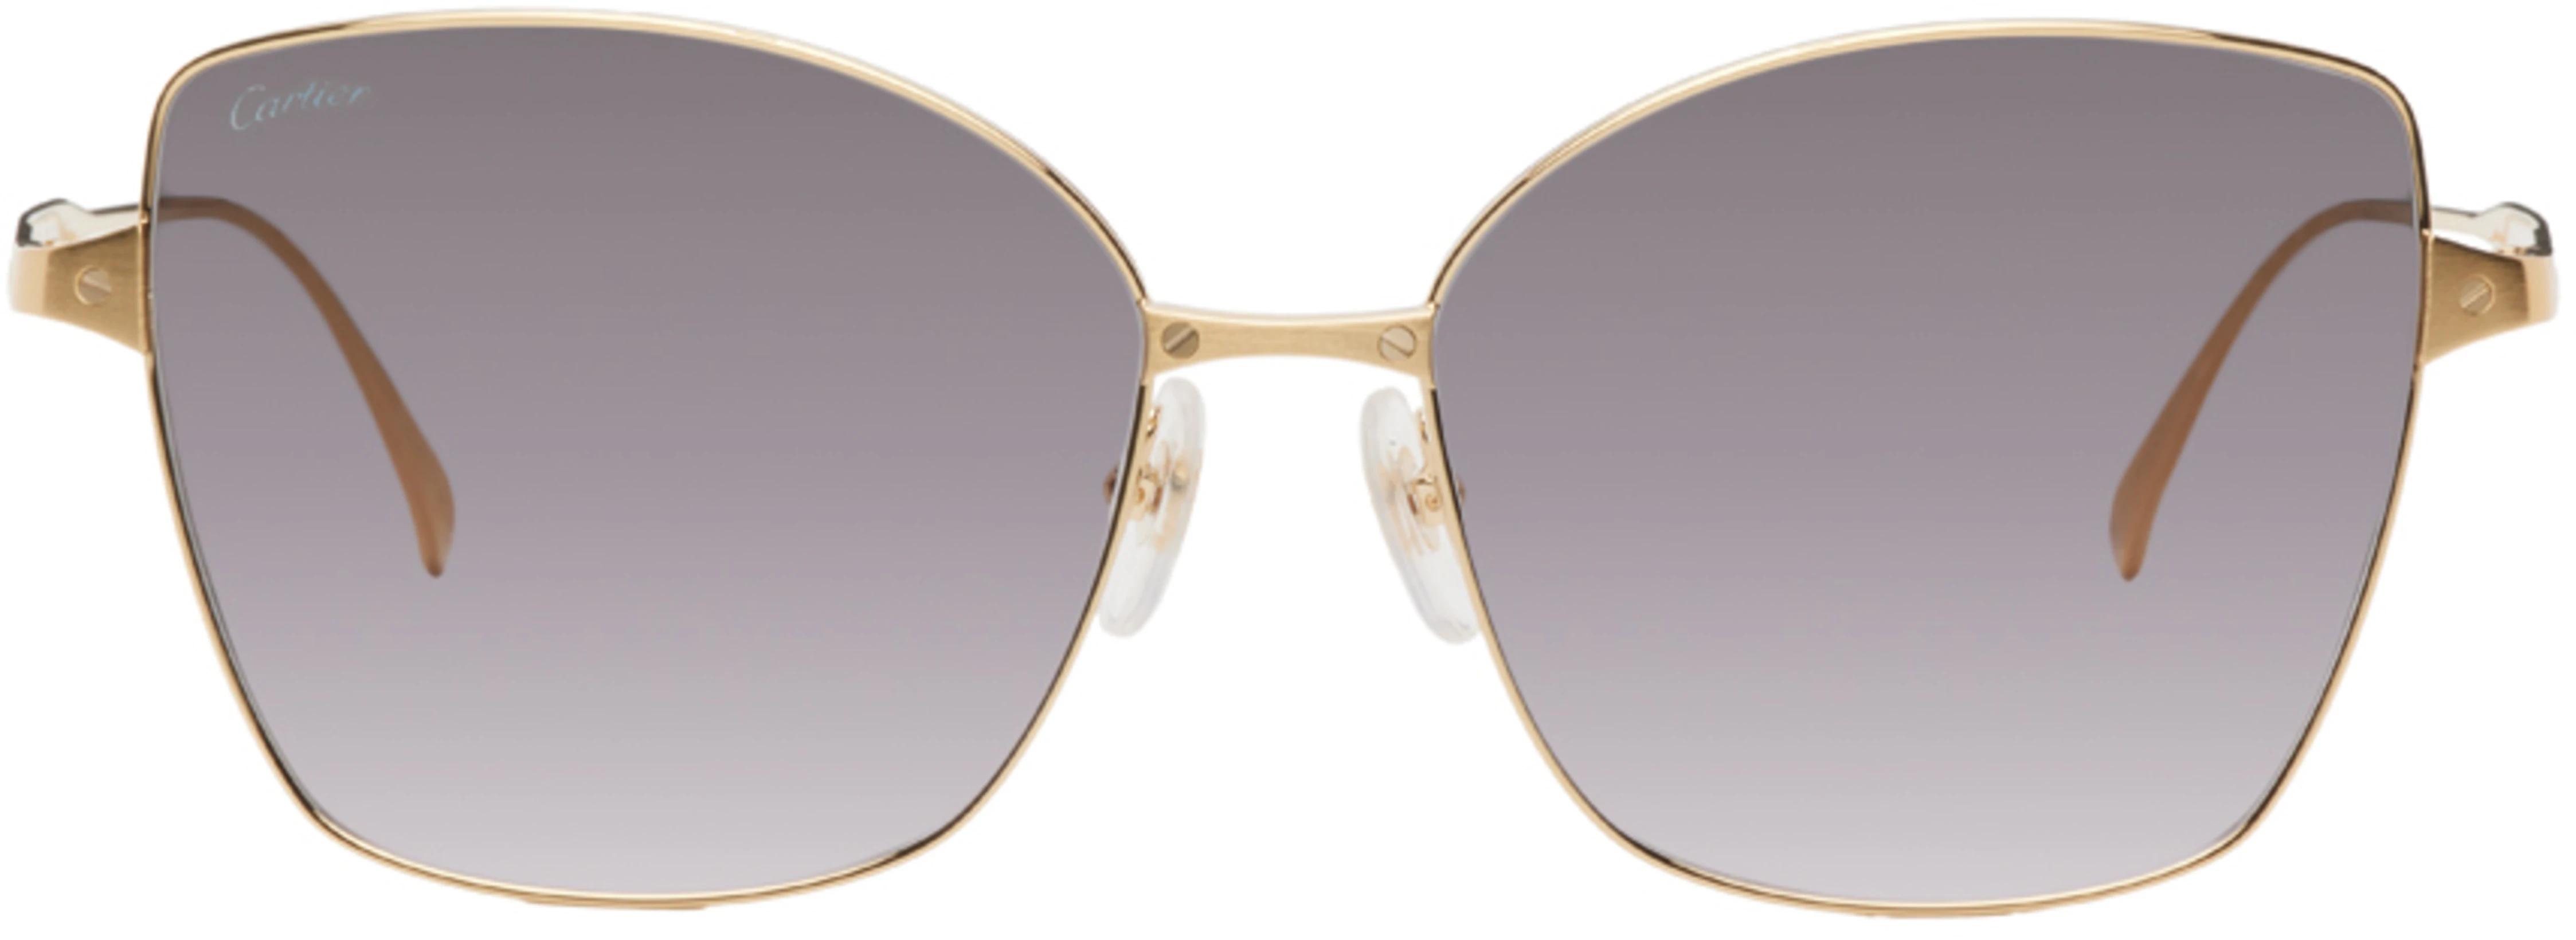 Gold Angled Cat-Eye Sunglasses by CARTIER